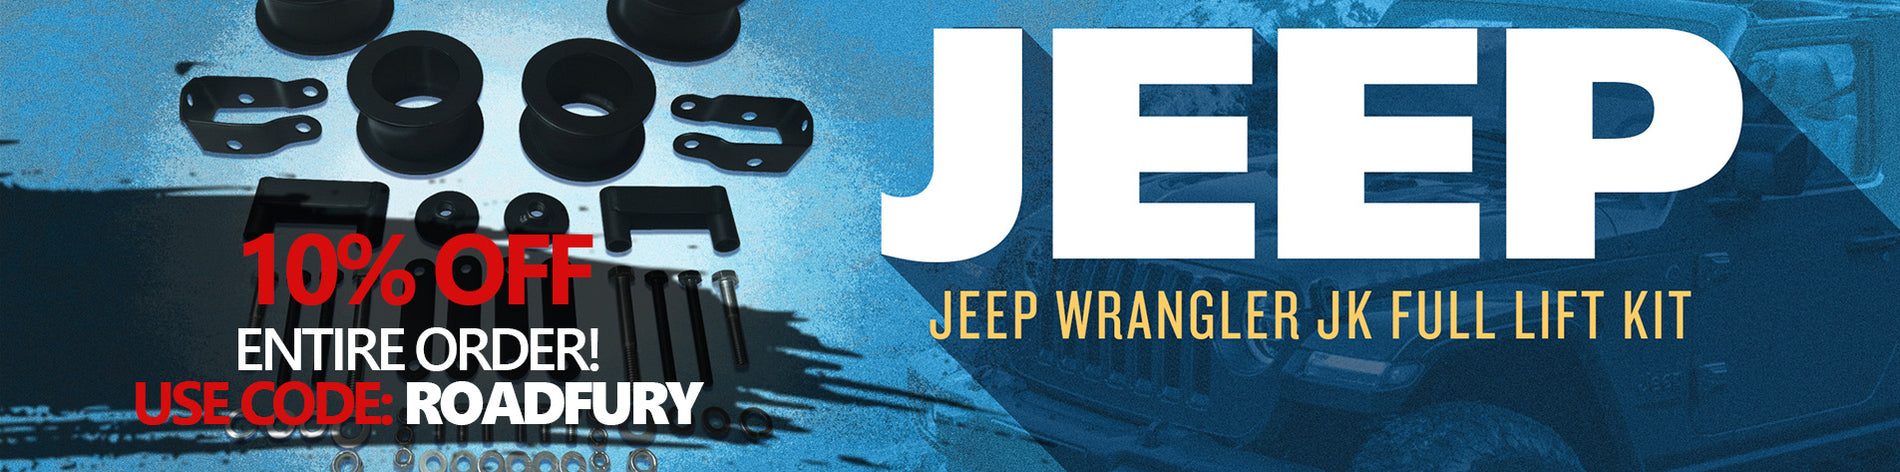 Website banner jeep with code